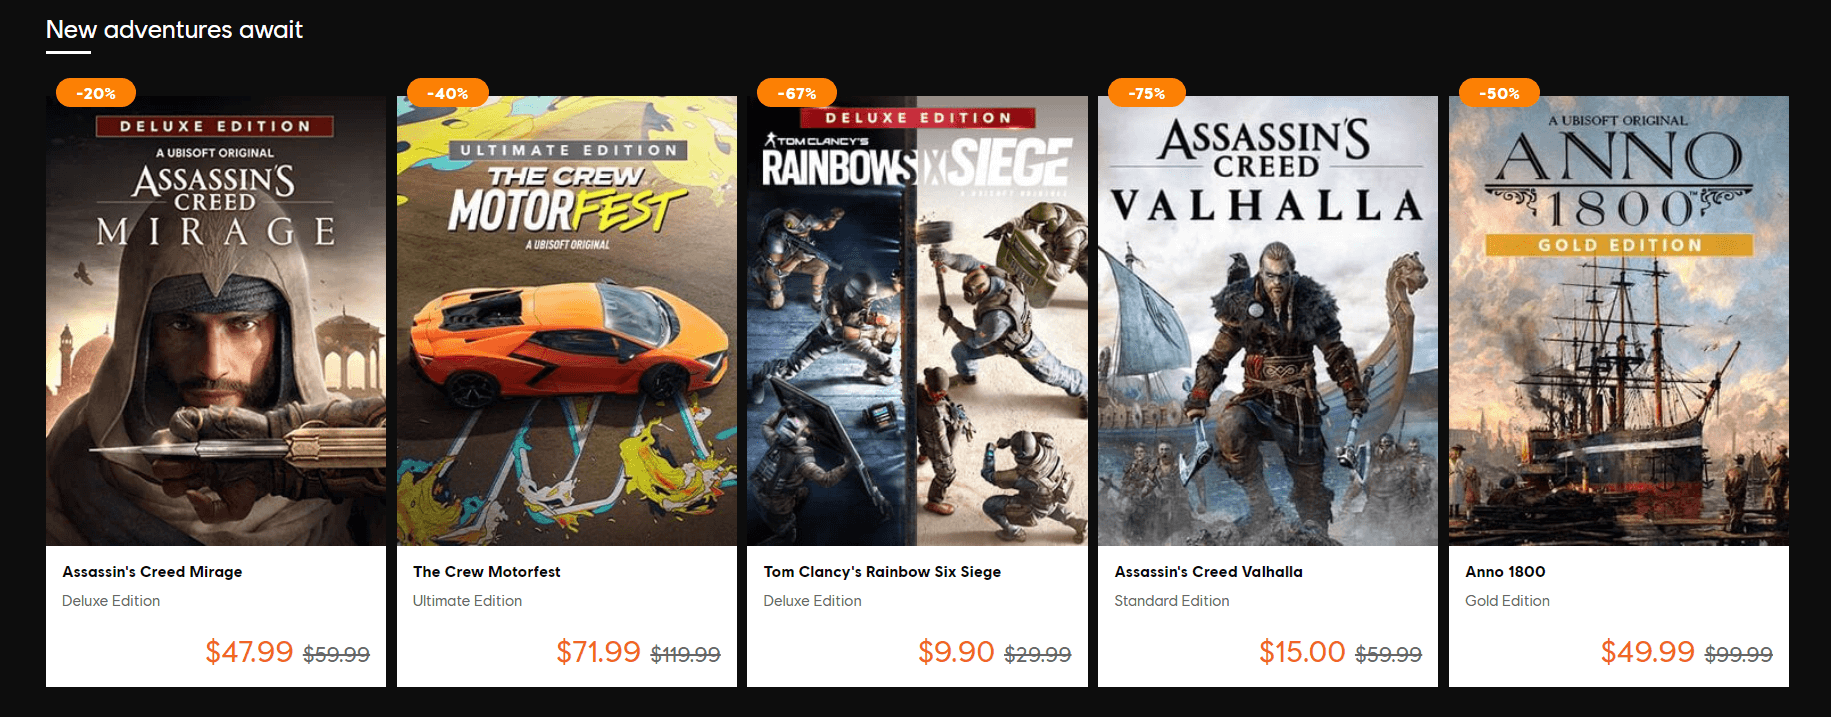 Major Ubisoft Games on Sale Right Now